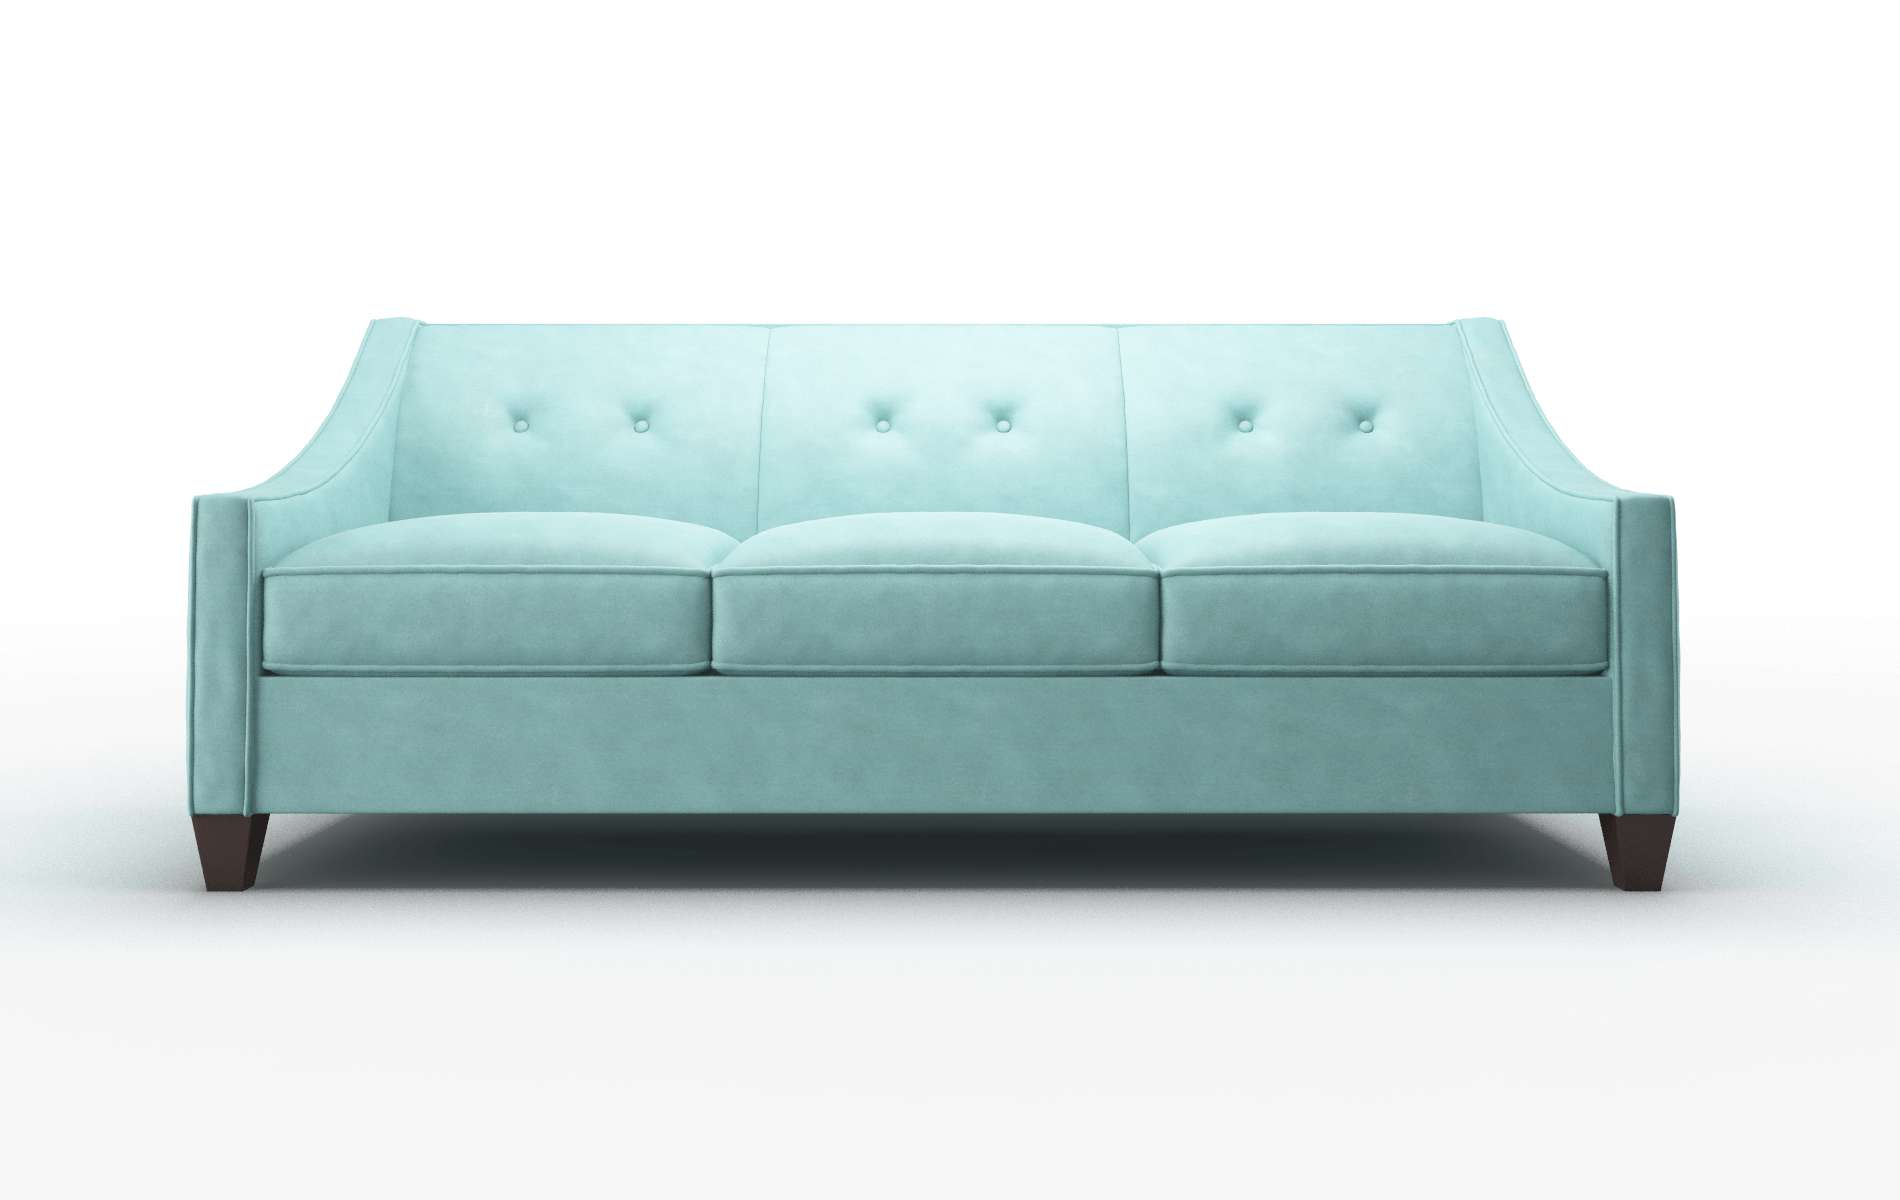 Berlin Curious Turquoise chair espresso legs